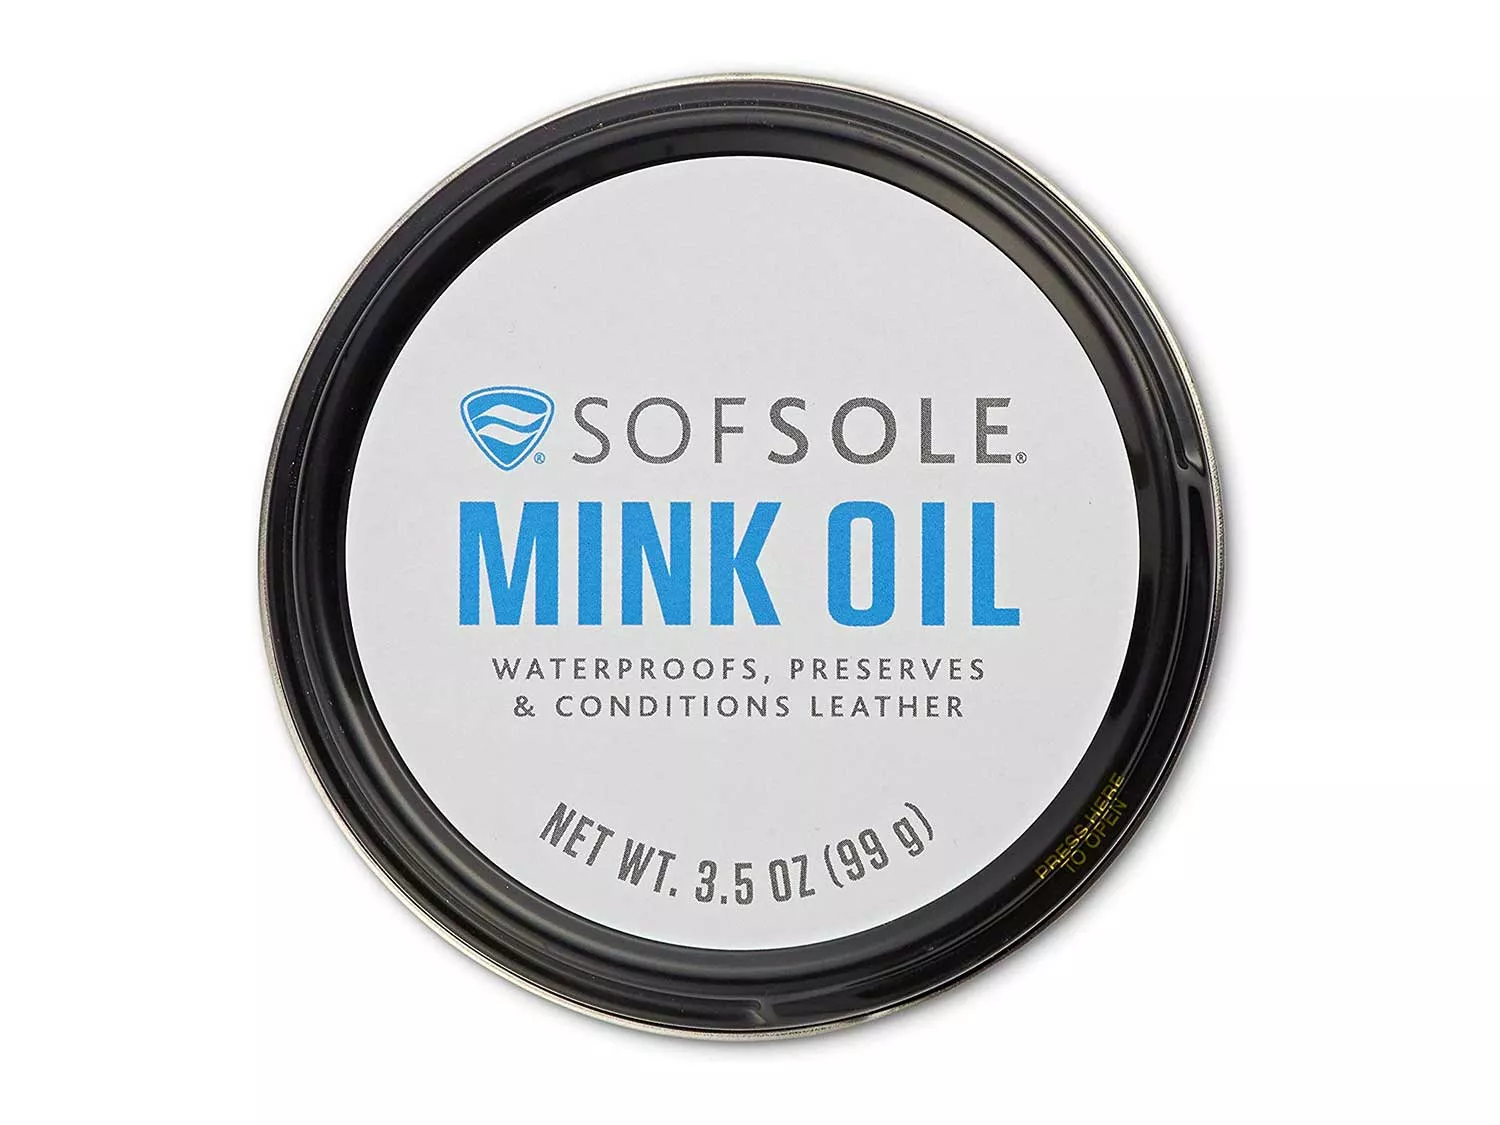 Sof Sole Mink Oil For Conditioning And Waterproofing Leather